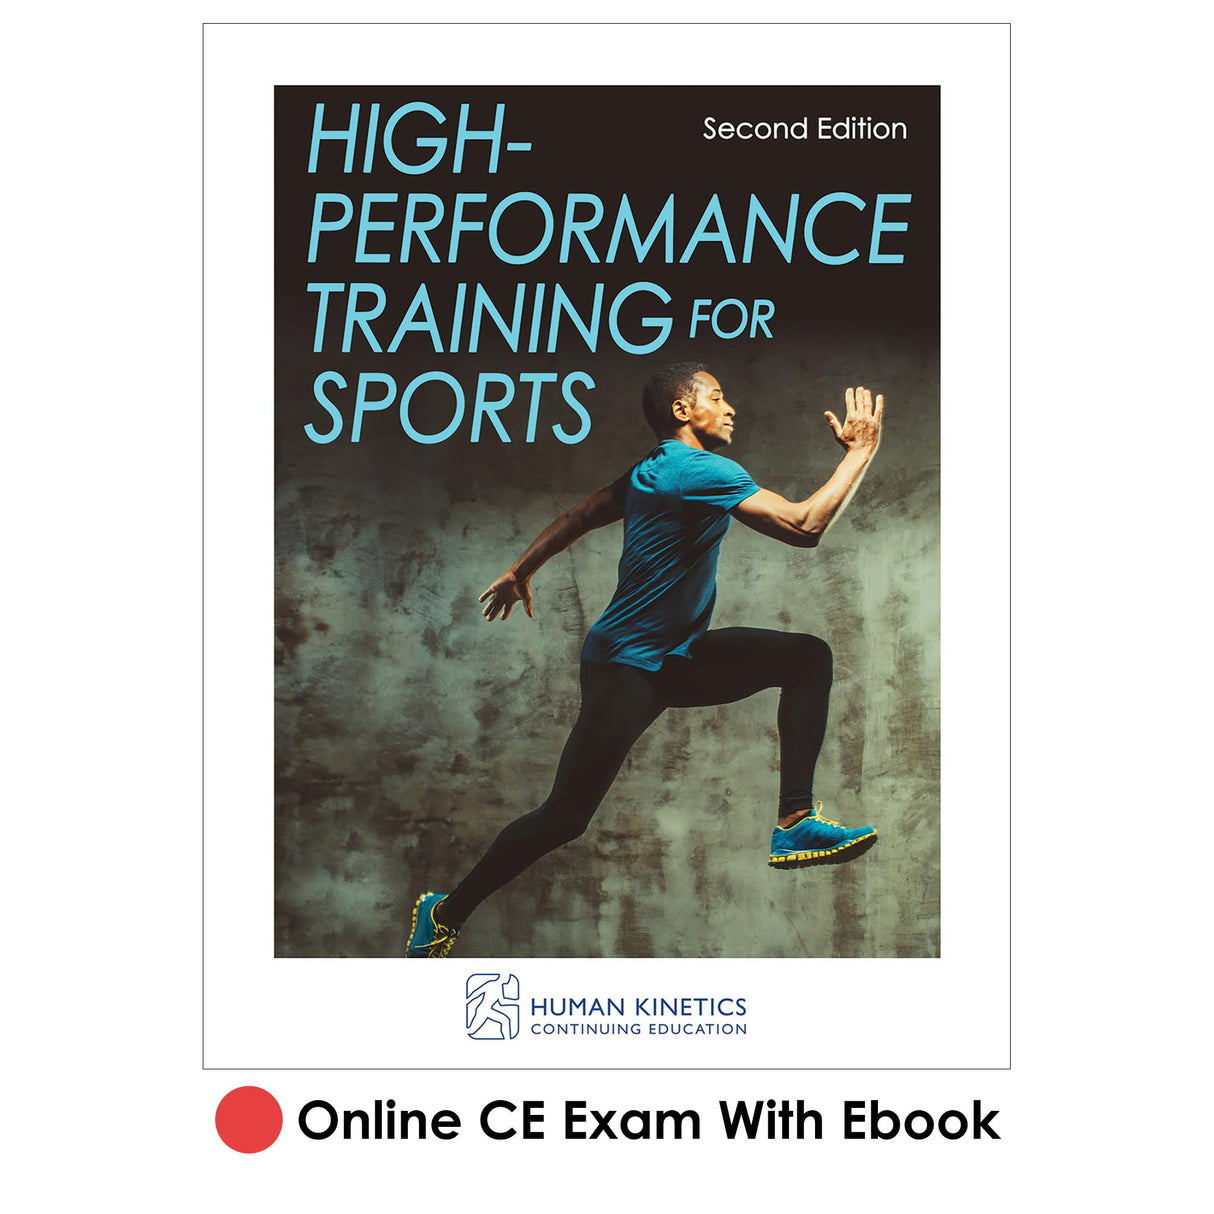 High-Performance Training for Sports 2nd Edition Online CE Exam With Ebook